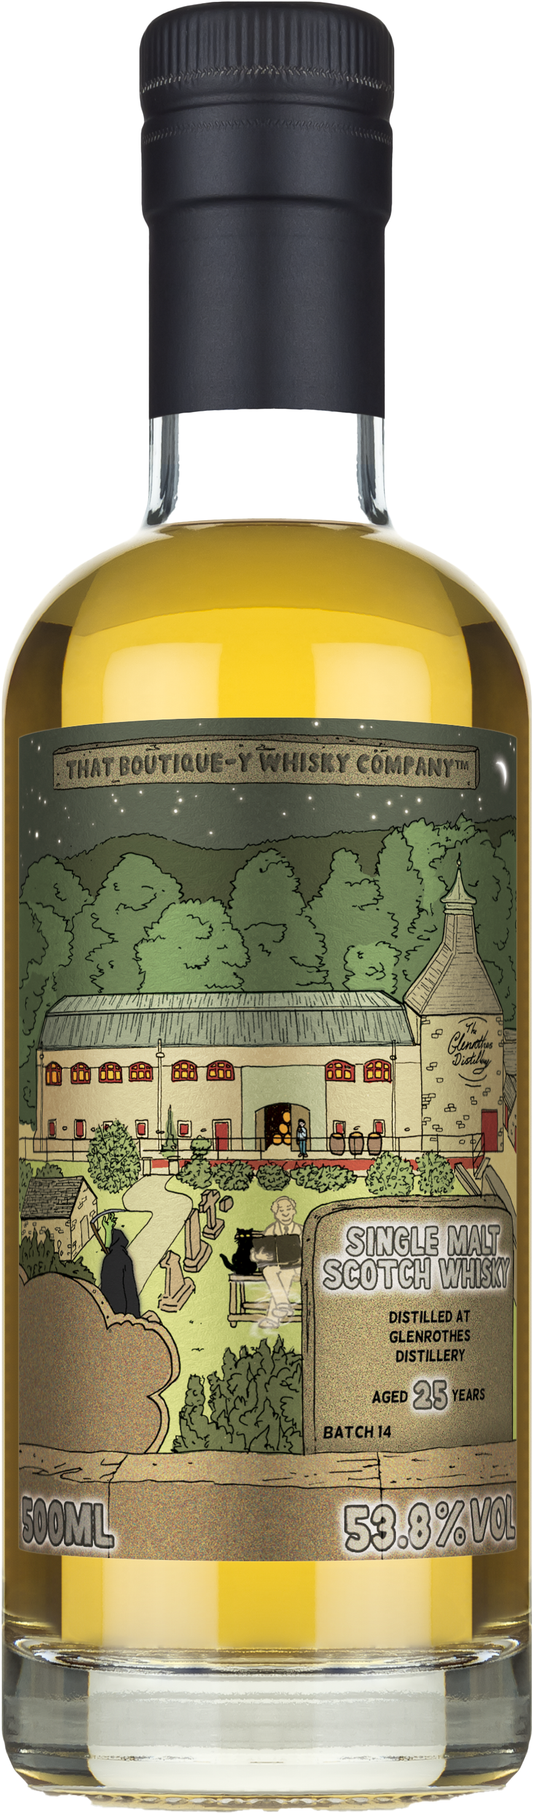 That Boutique-Y Whisky Company Glenrothes 25 Year Batch 14 Single Malt Scotch Whisky 500ml